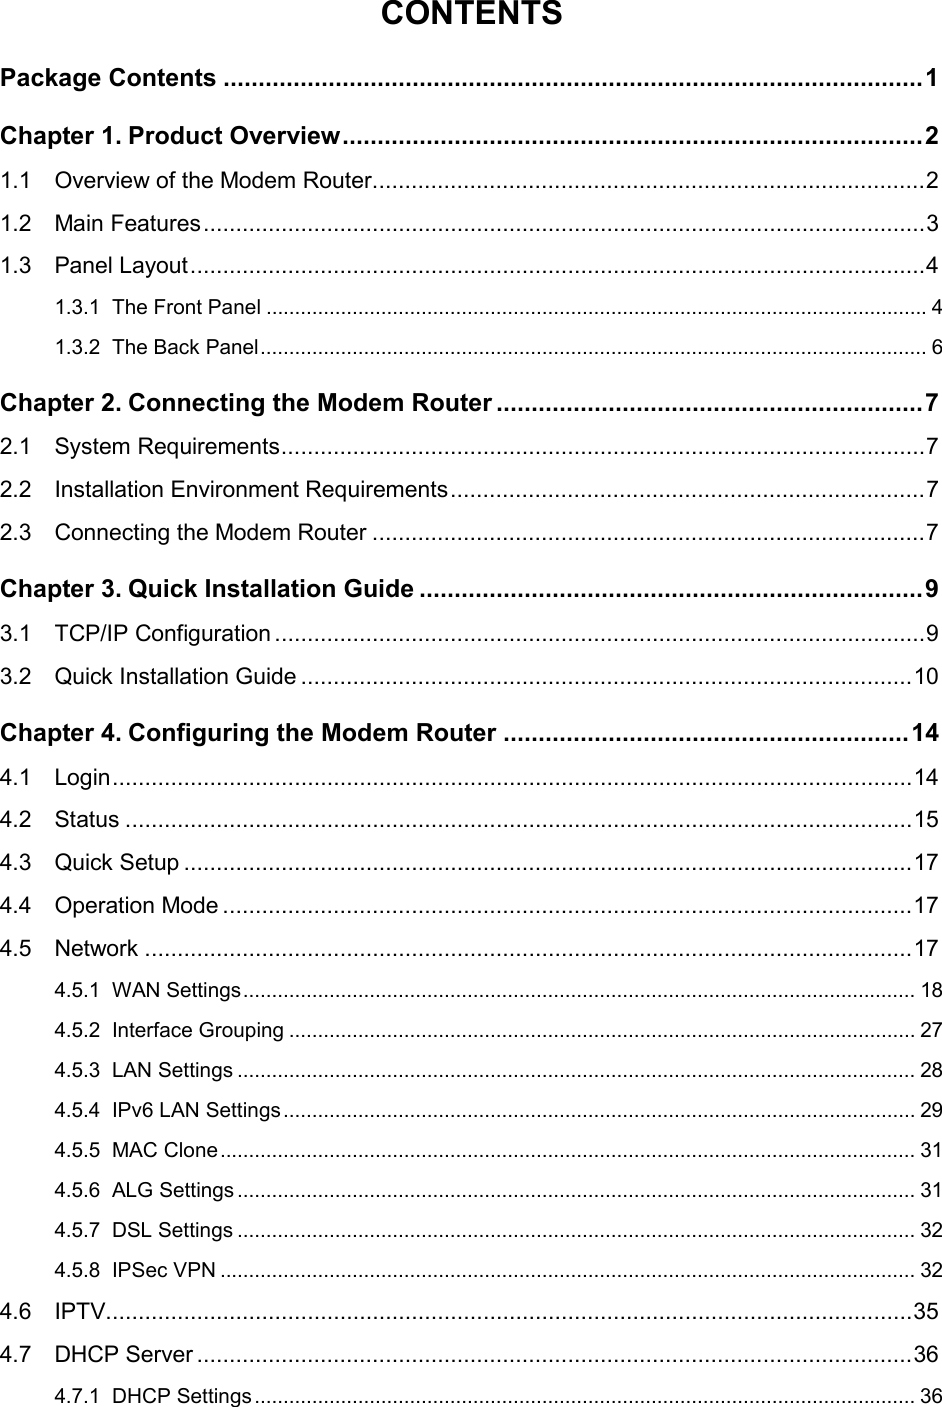  CONTENTS Package Contents .................................................................................................... 1 Chapter 1. Product Overview ................................................................................... 2 1.1 Overview of the Modem Router ..................................................................................... 2 1.2 Main Features ............................................................................................................... 3 1.3 Panel Layout ................................................................................................................. 4 1.3.1 The Front Panel ................................................................................................................... 4 1.3.2 The Back Panel .................................................................................................................... 6 Chapter 2. Connecting the Modem Router ............................................................. 7 2.1 System Requirements ................................................................................................... 7 2.2 Installation Environment Requirements ......................................................................... 7 2.3 Connecting the Modem Router ..................................................................................... 7 Chapter 3. Quick Installation Guide ........................................................................ 9 3.1 TCP/IP Configuration .................................................................................................... 9 3.2 Quick Installation Guide .............................................................................................. 10 Chapter 4. Configuring the Modem Router .......................................................... 14 4.1 Login ........................................................................................................................... 14 4.2 Status ......................................................................................................................... 15 4.3 Quick Setup ................................................................................................................ 17 4.4 Operation Mode .......................................................................................................... 17 4.5 Network ...................................................................................................................... 17 4.5.1 WAN Settings ..................................................................................................................... 18 4.5.2 Interface Grouping ............................................................................................................. 27 4.5.3 LAN Settings ...................................................................................................................... 28 4.5.4 IPv6 LAN Settings .............................................................................................................. 29 4.5.5 MAC Clone ......................................................................................................................... 31 4.5.6 ALG Settings ...................................................................................................................... 31 4.5.7 DSL Settings ...................................................................................................................... 32 4.5.8 IPSec VPN ......................................................................................................................... 32 4.6 IPTV............................................................................................................................ 35 4.7 DHCP Server .............................................................................................................. 36 4.7.1 DHCP Settings ................................................................................................................... 36  